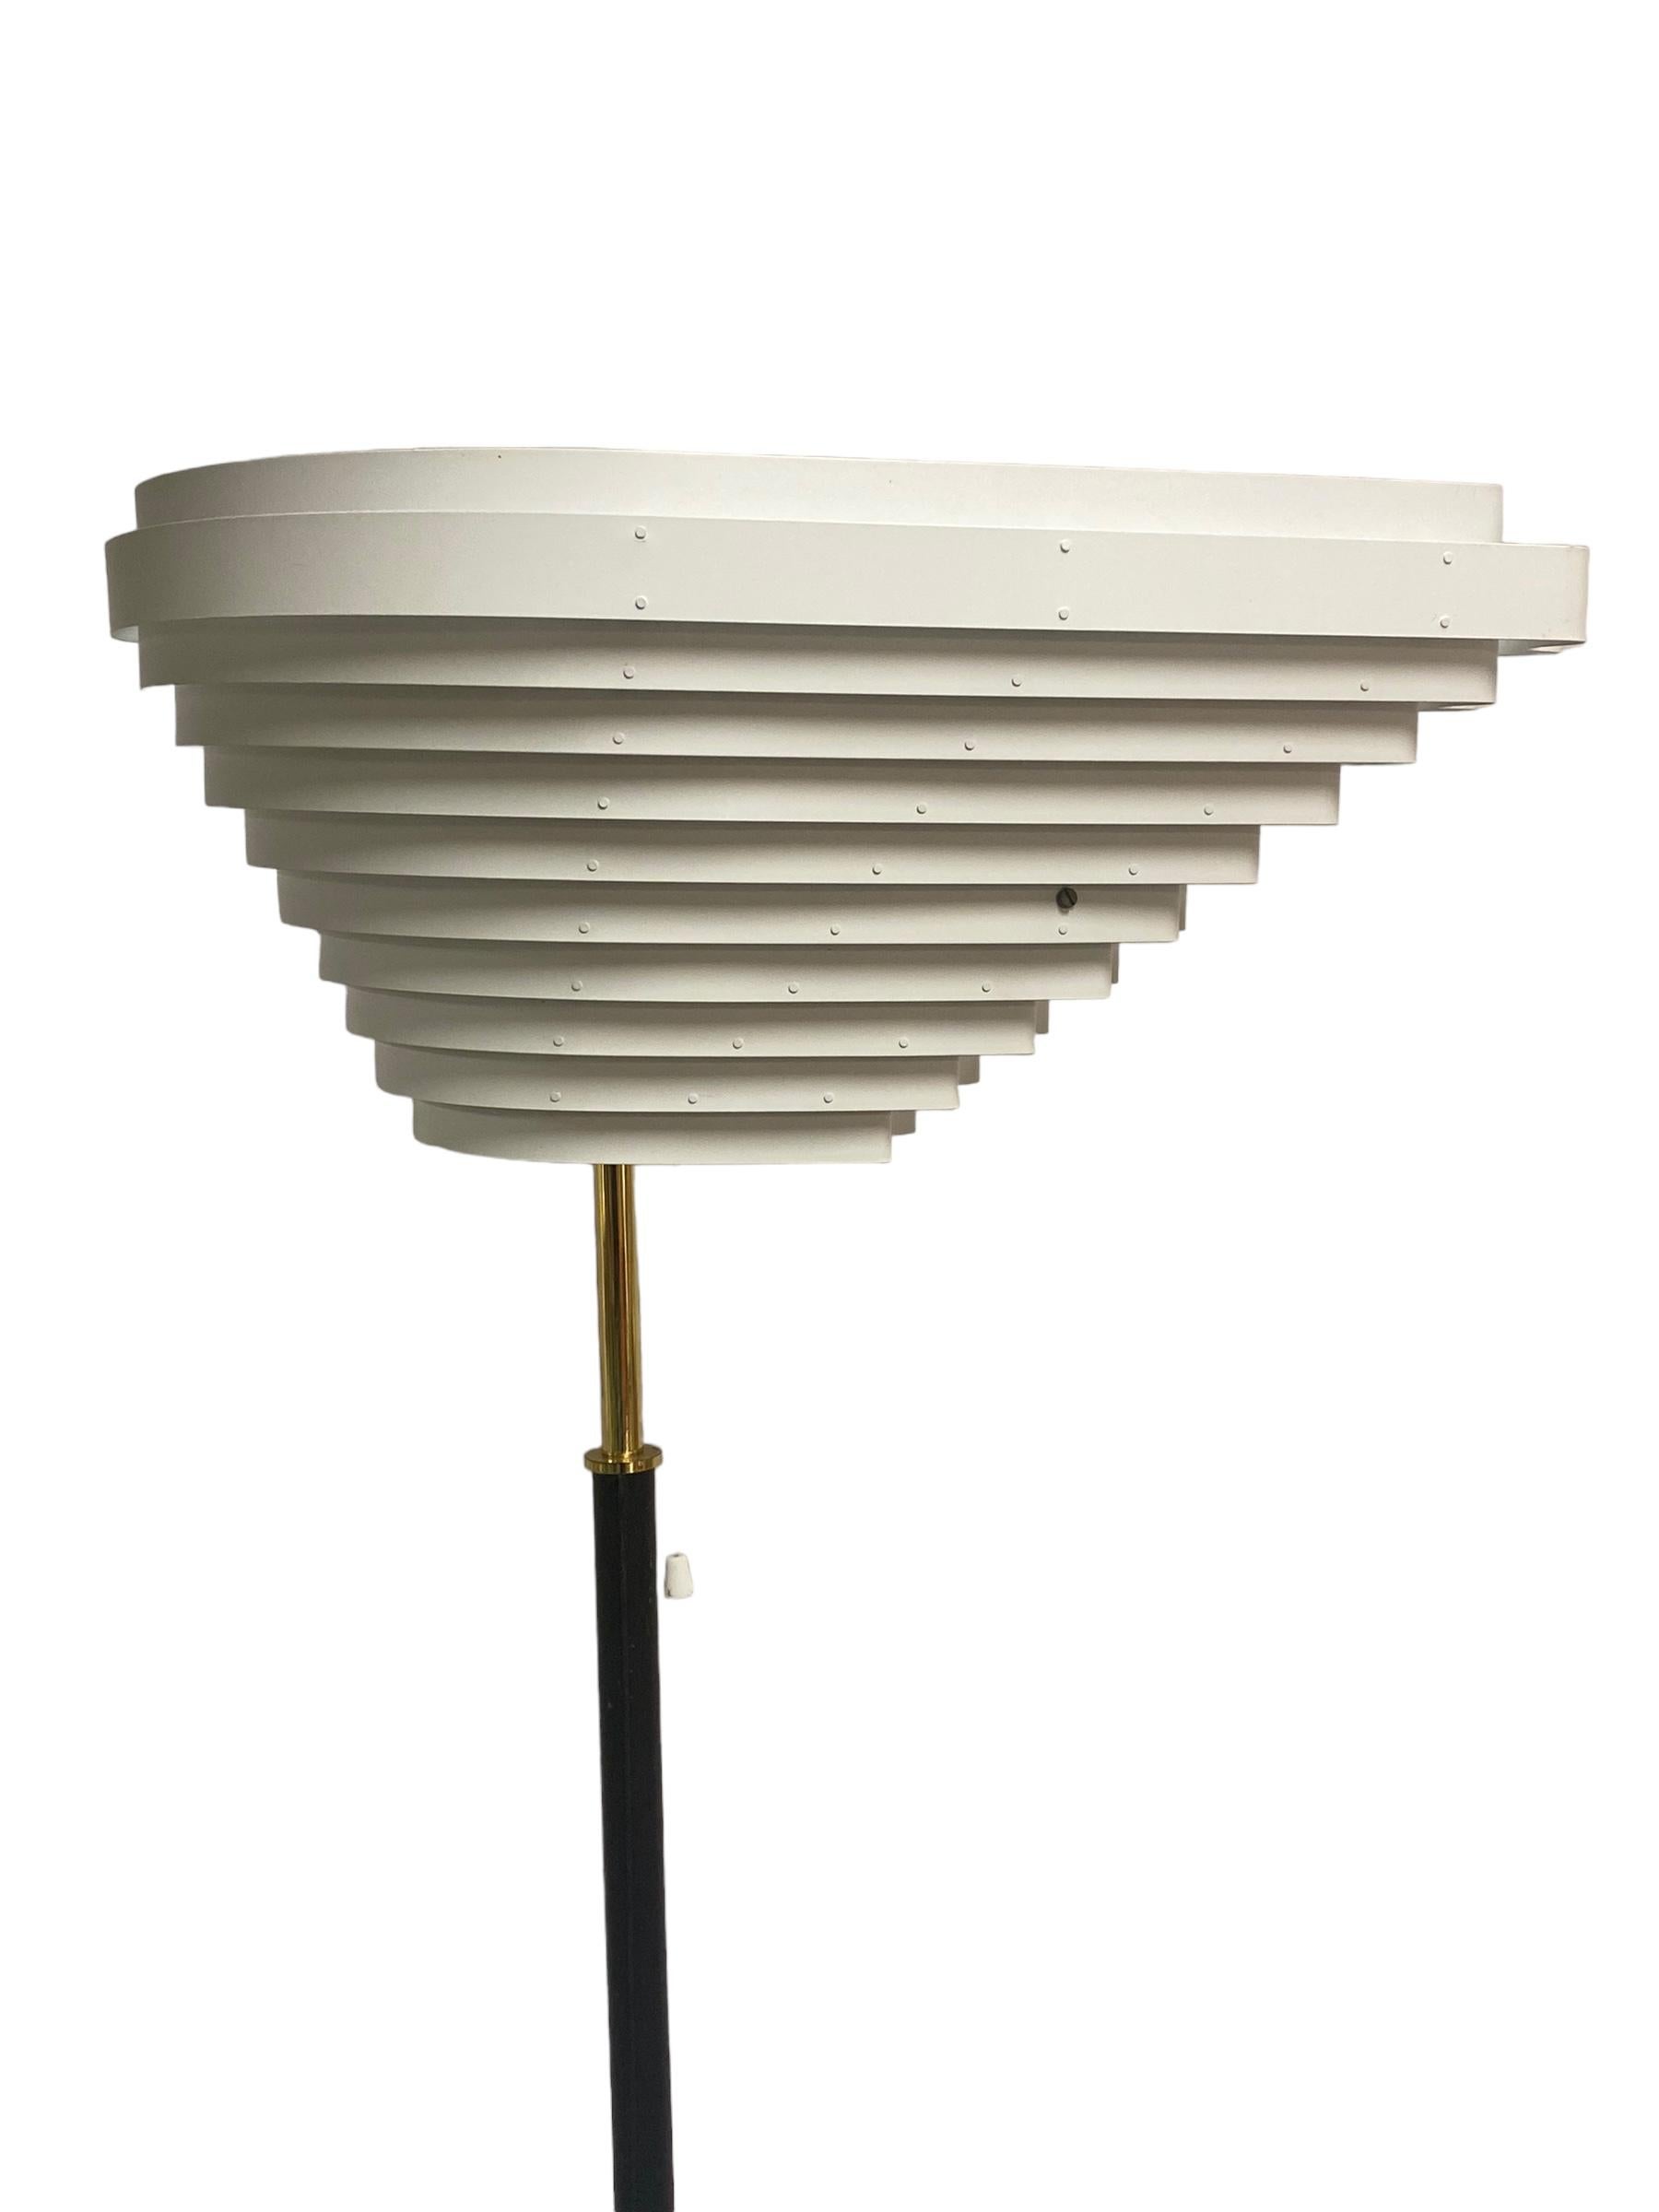 This lamp is a legendary Alvar Aalto design and one of his finest creations.

It was first designed in 1954 for the Social Insurance Institution of Finland.

The name of course comes from the shape of the shade which is asymmetrical and looks like